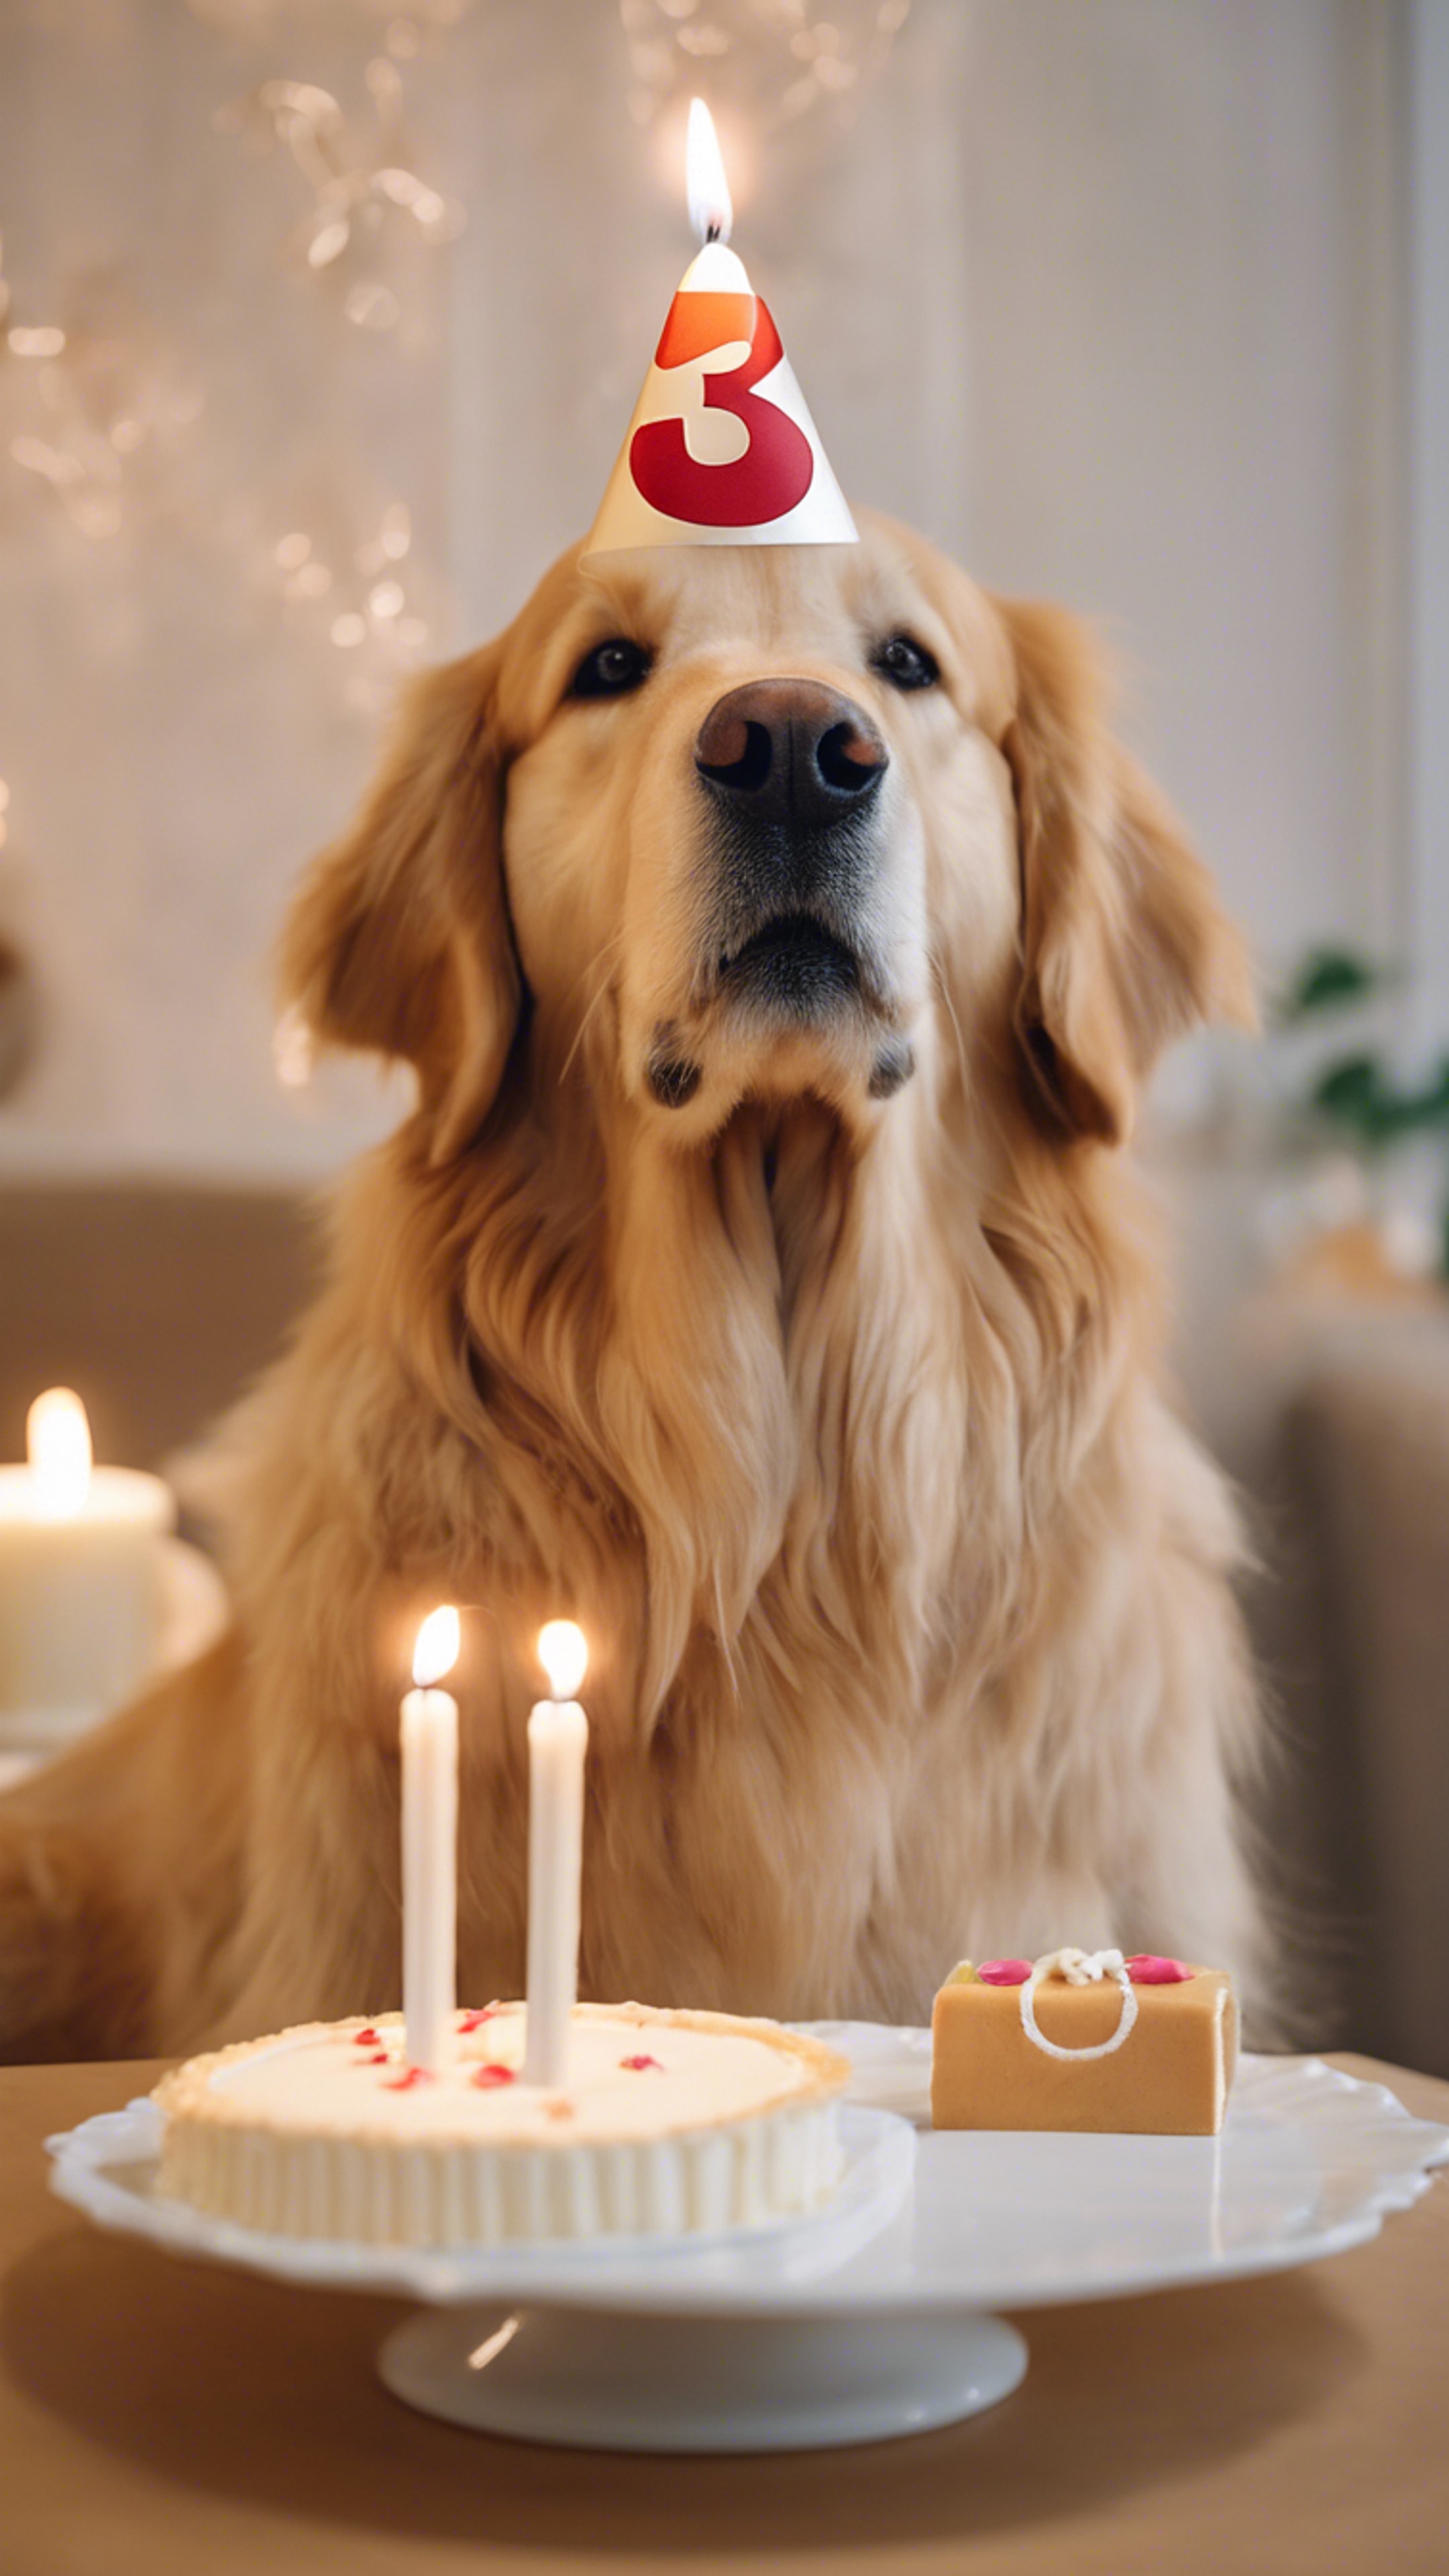 A golden retriever wearing a birthday hat, sitting in front of a numbered '3' candle on a small cake, looking eagerly at the camera. 墙纸[271fe240b95e4af1b864]